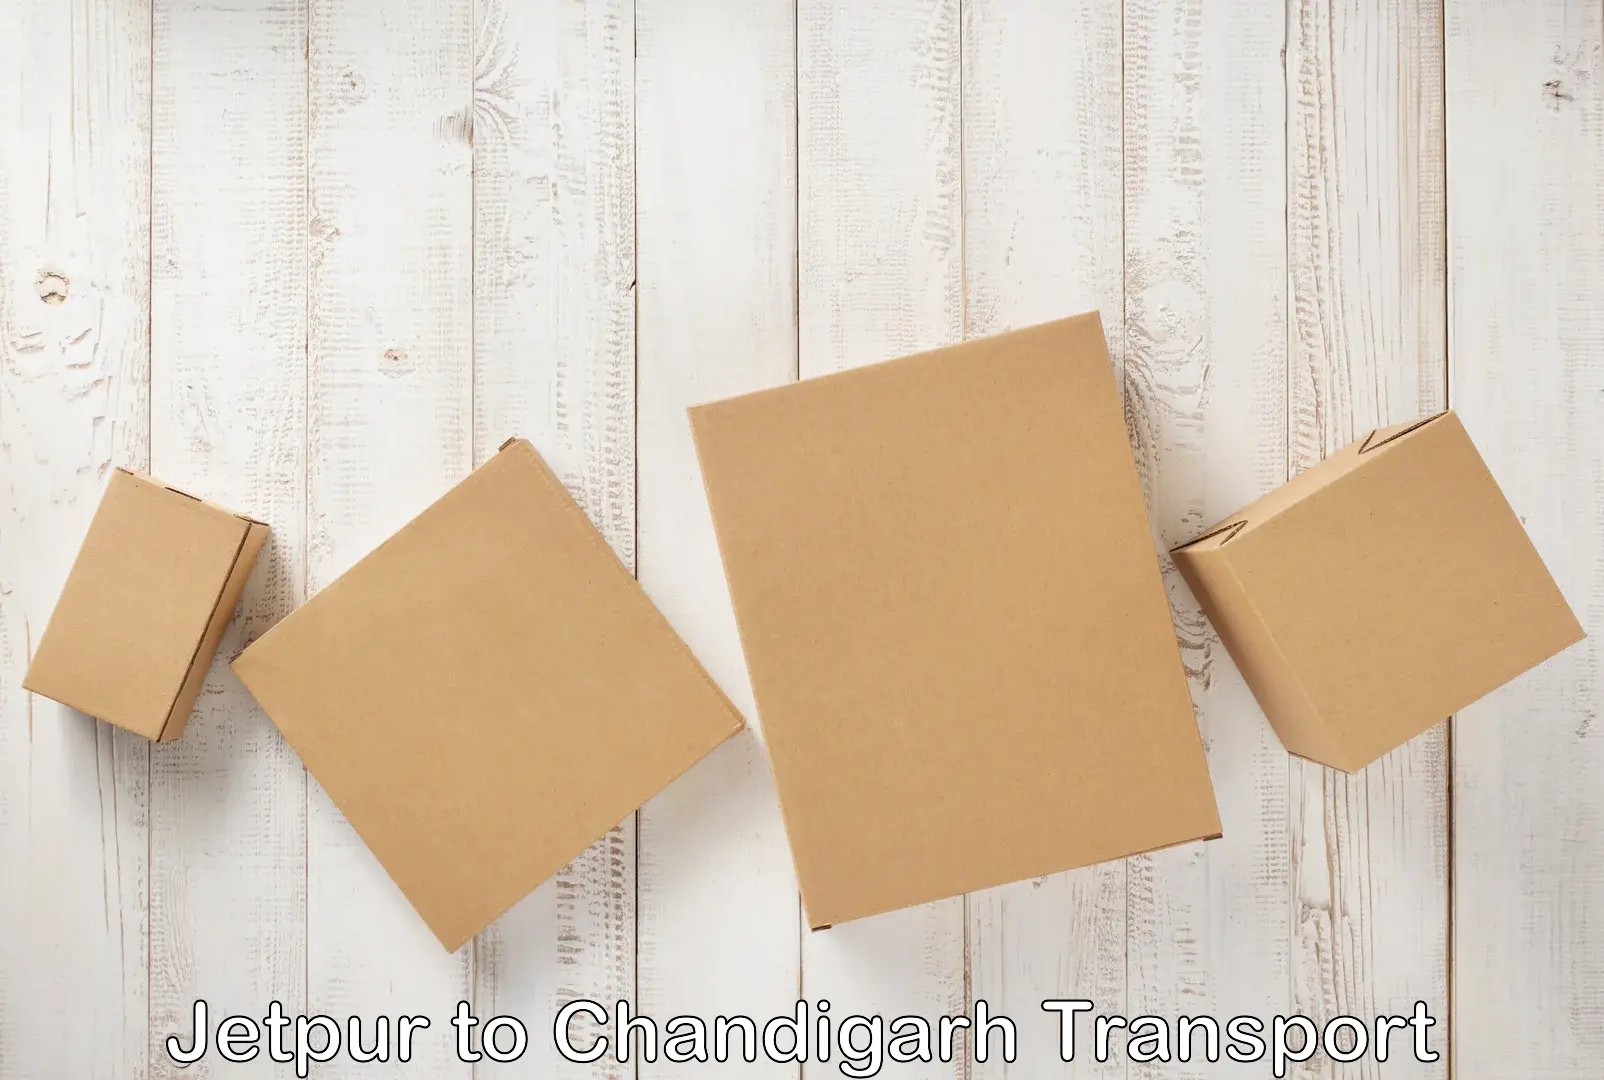 Truck transport companies in India Jetpur to Chandigarh